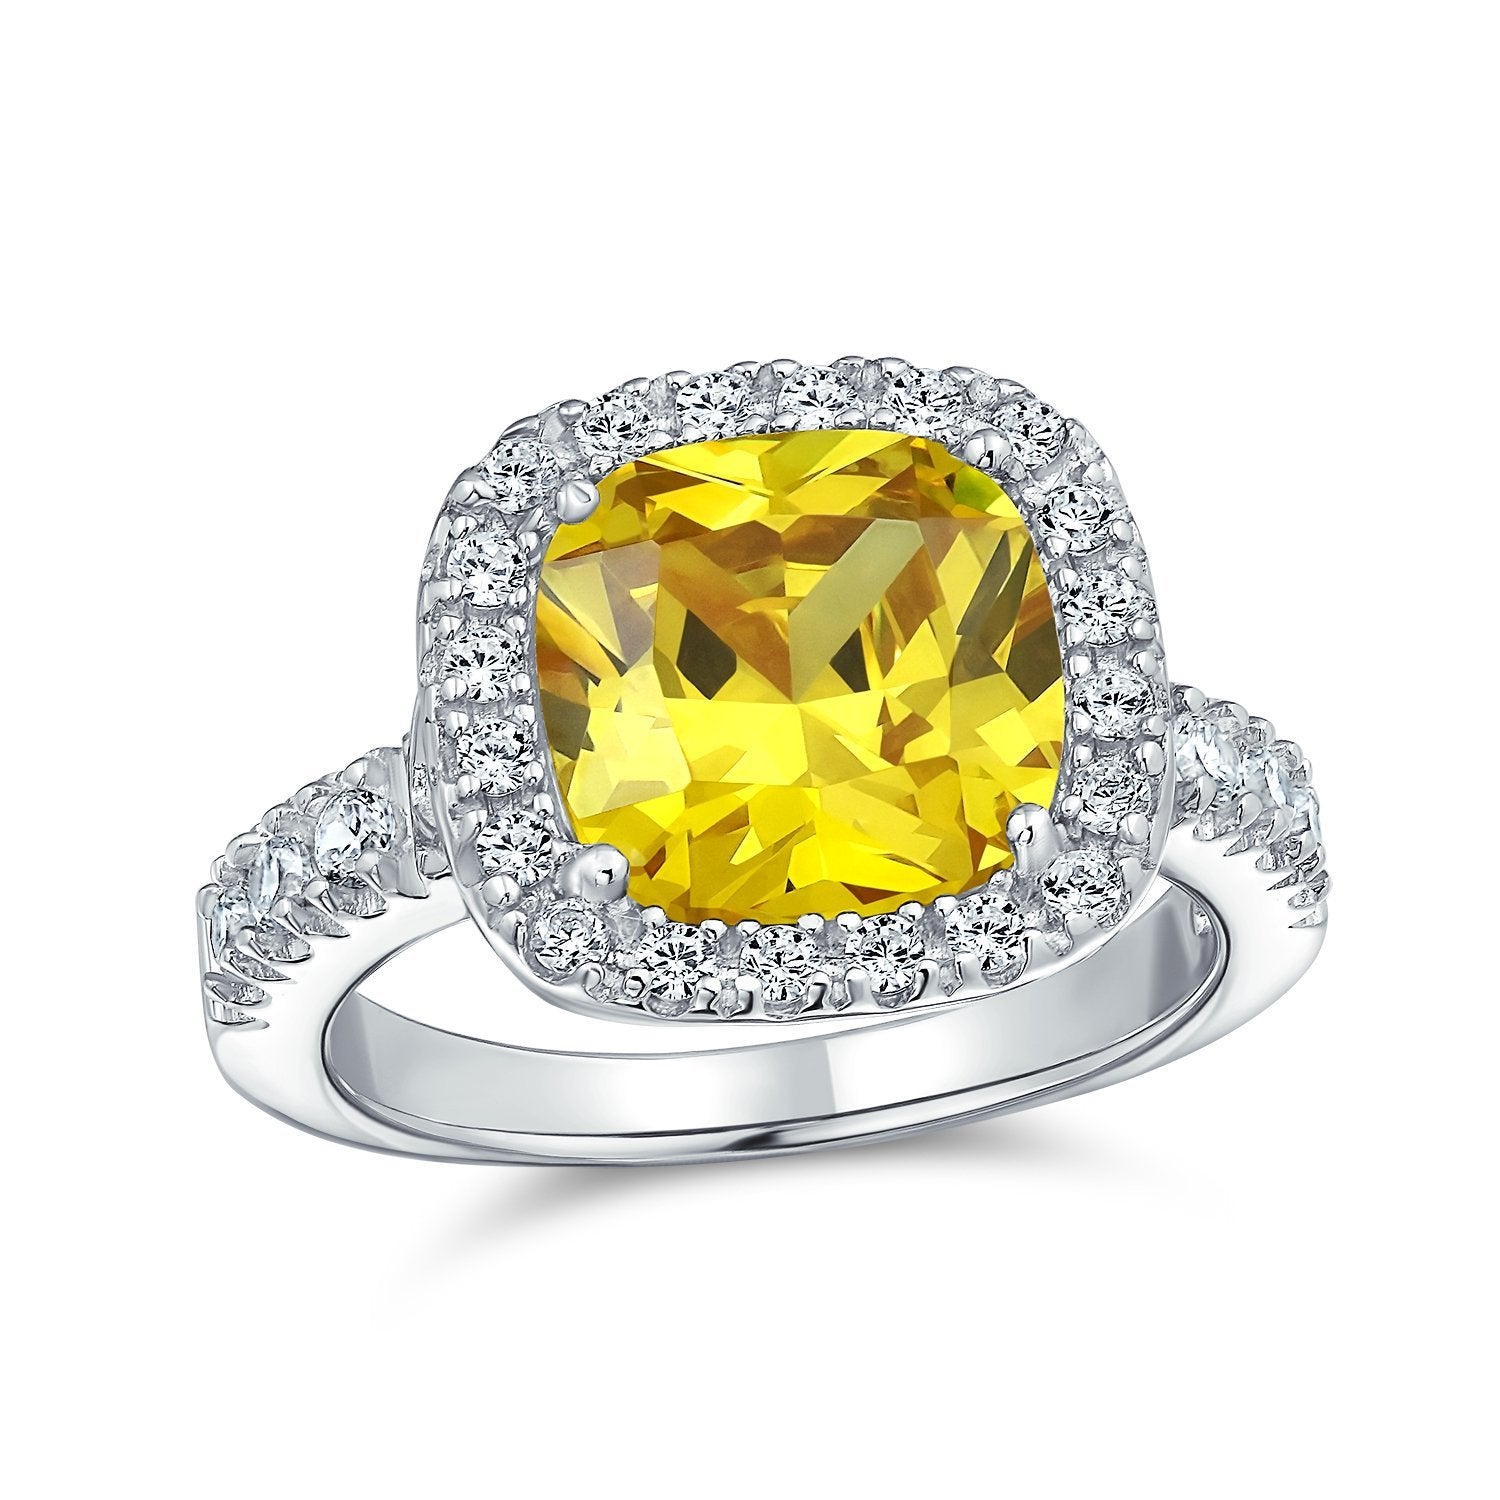 6CT Canary Yellow Cushion Cut CZ Engagement Ring Sterling Silver - Joyeria Lady